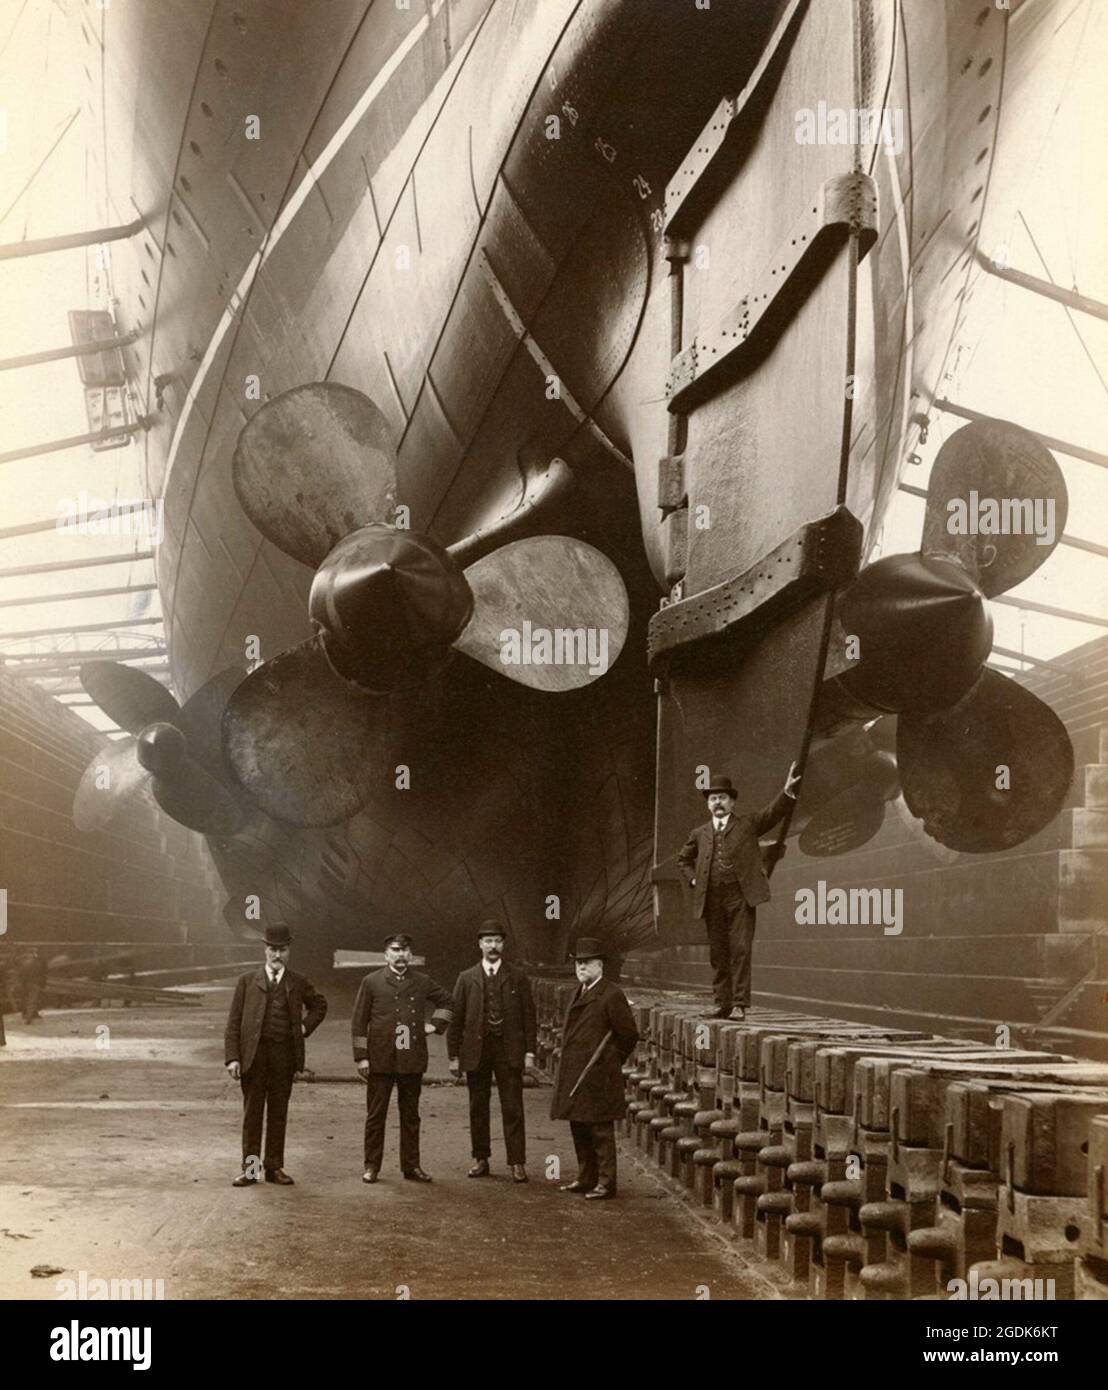 The massive stern and propellers of the RMS Mauretania, with human figures giving a sense of how big the ship is Stock Photo